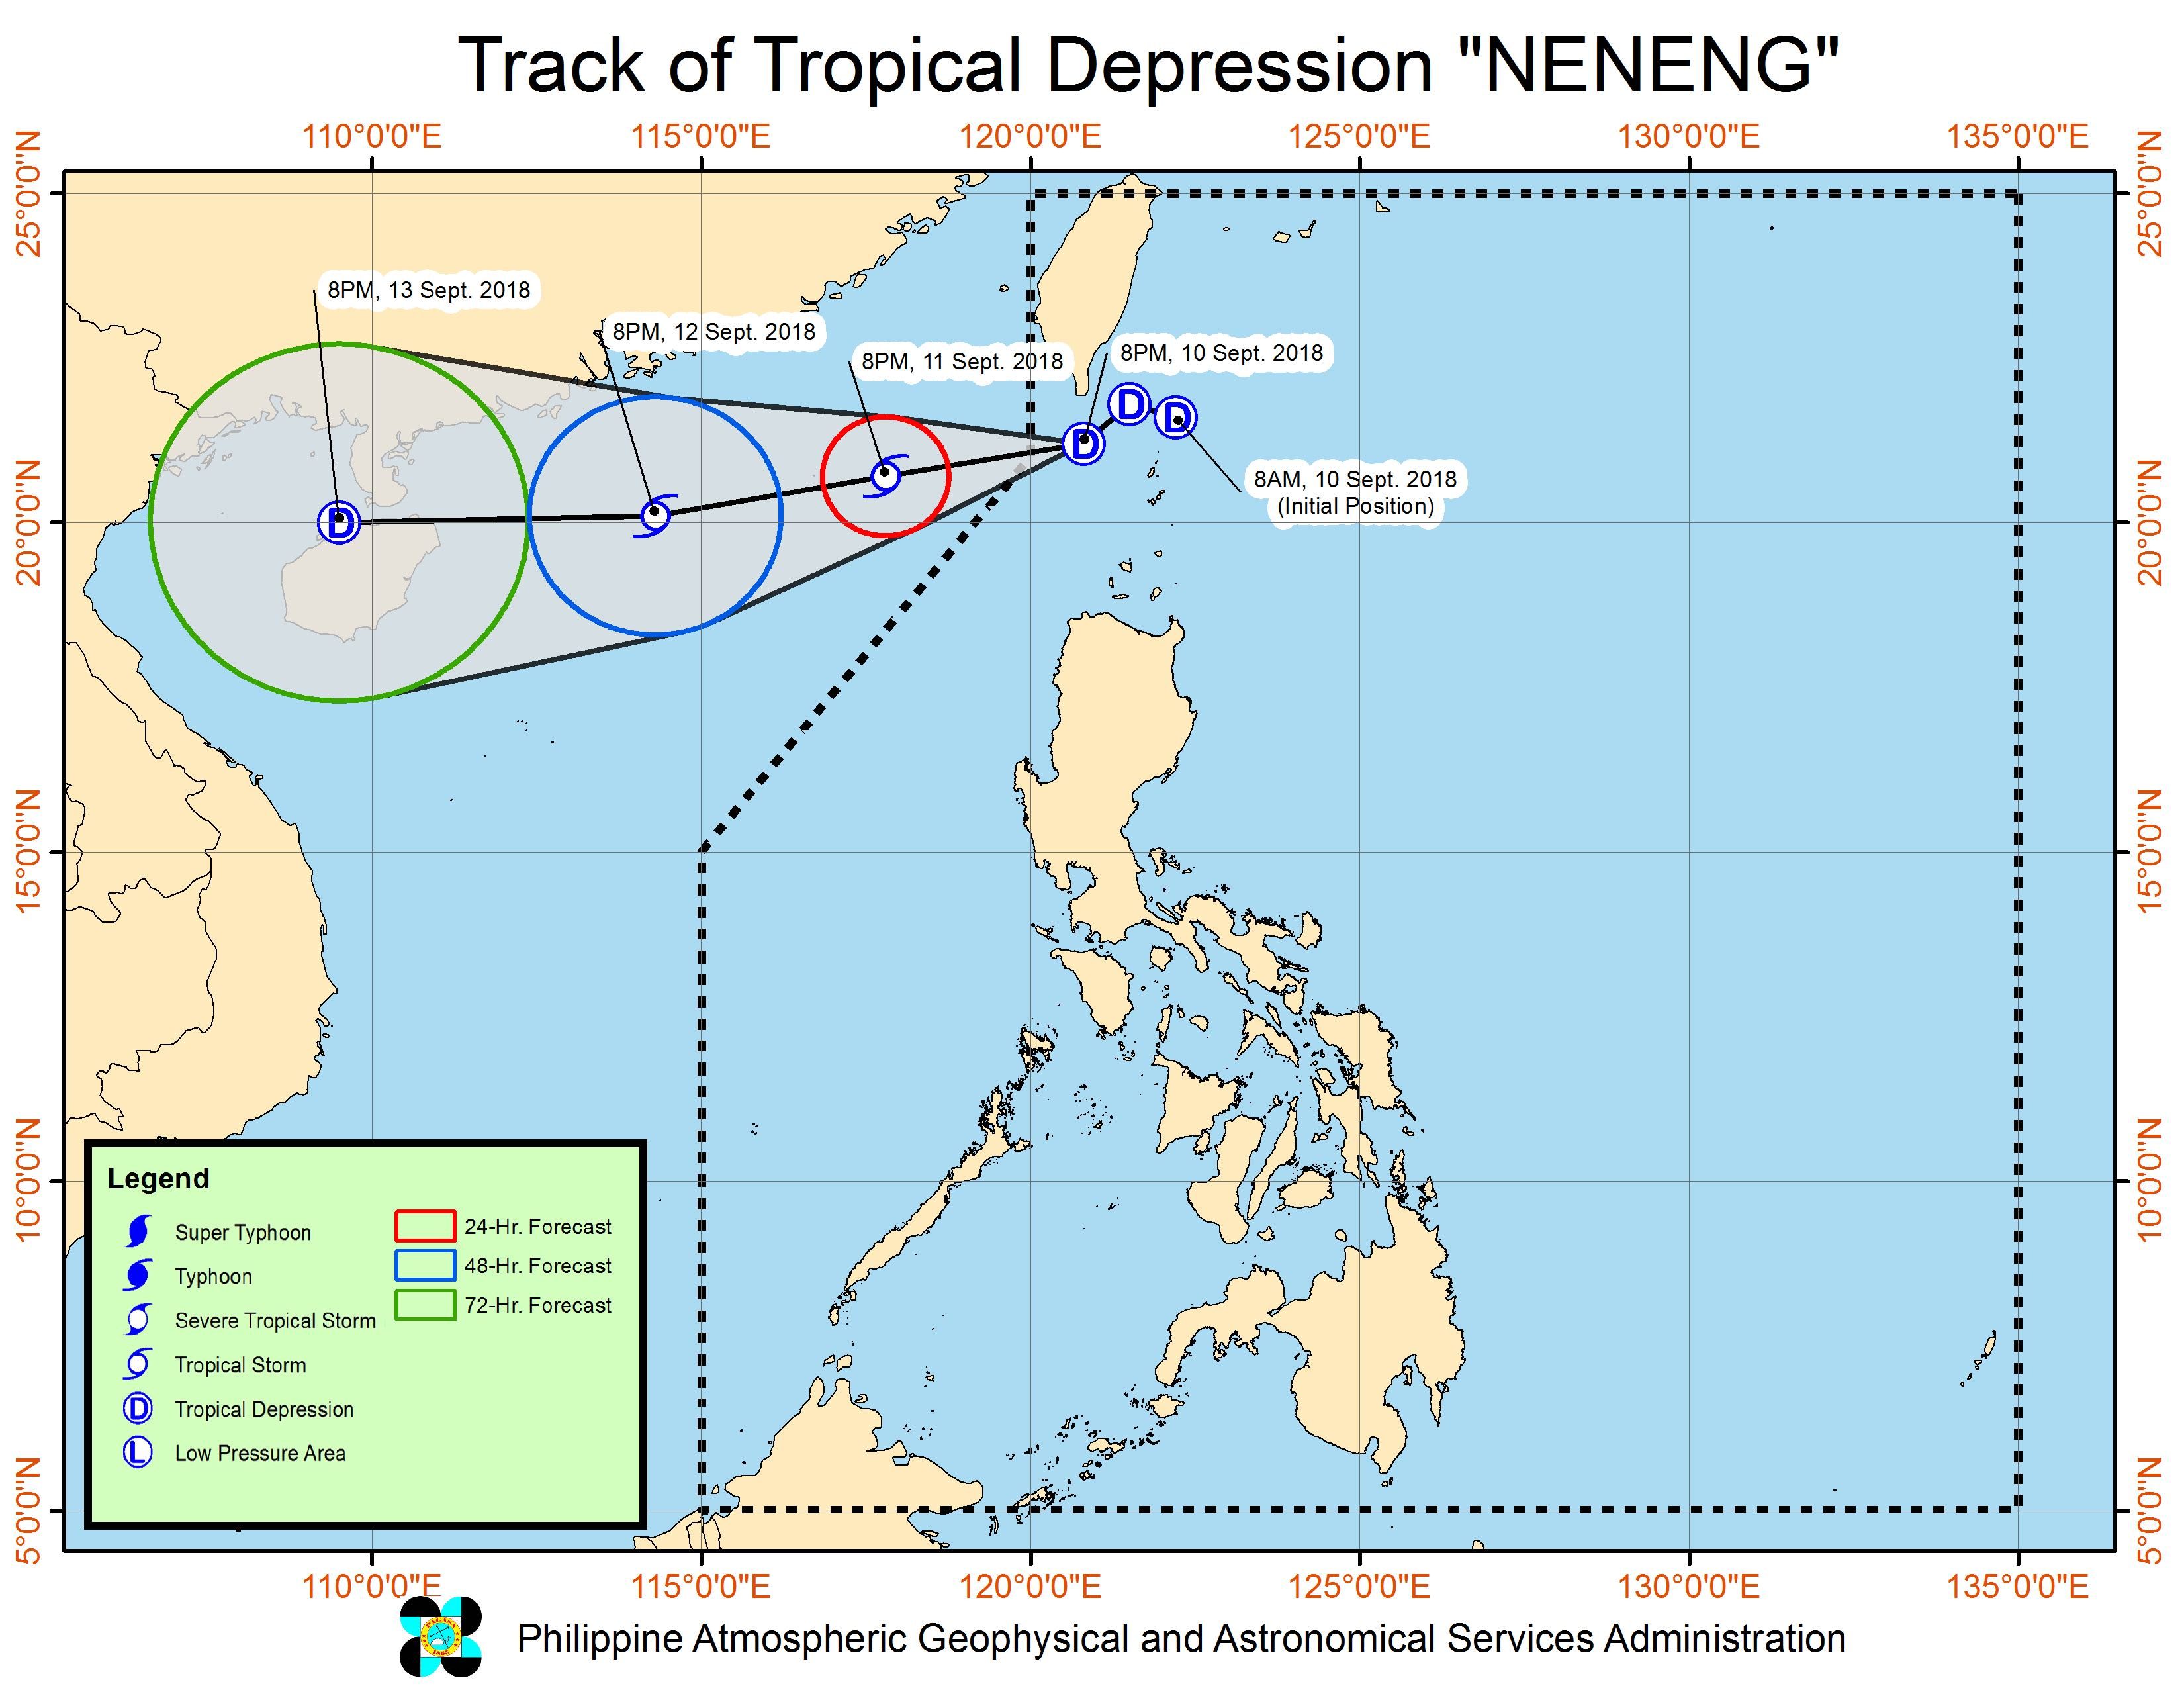 Forecast track of Tropical Depression Neneng as of September 10, 2018, 11 pm. Image from PAGASA 